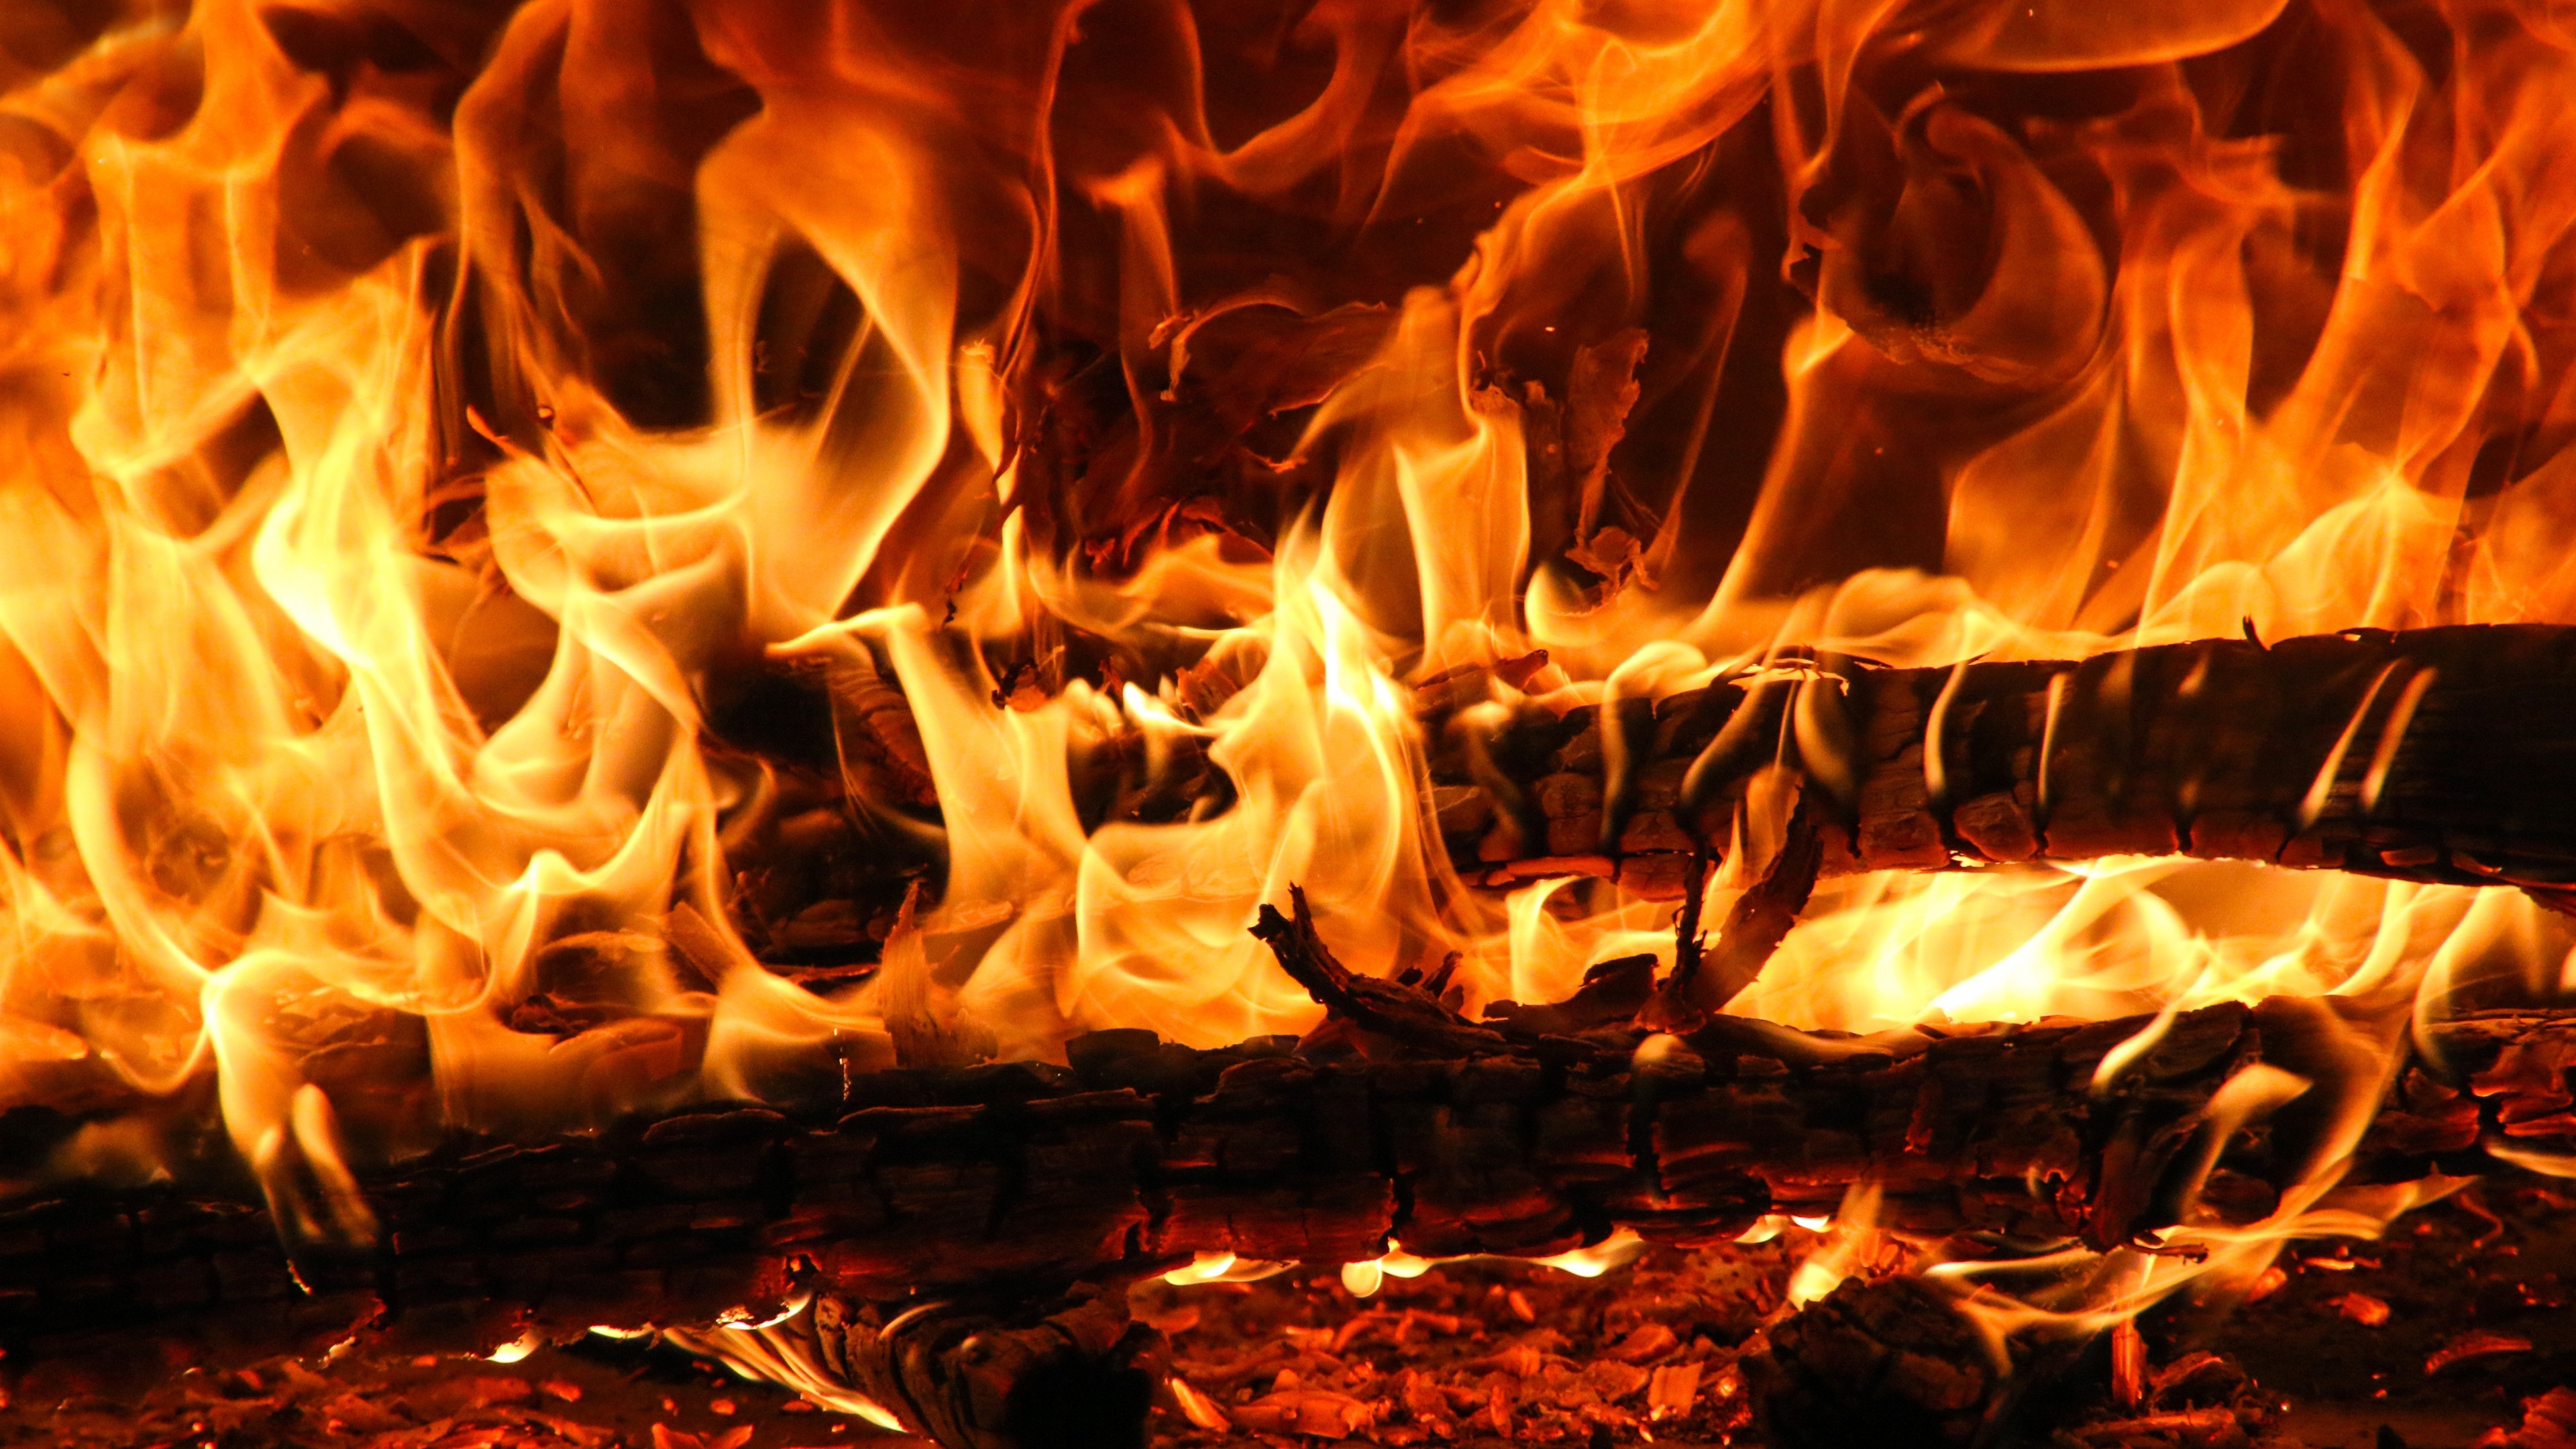 Burning Wood on Brown Soil. Wallpaper in 3840x2160 Resolution